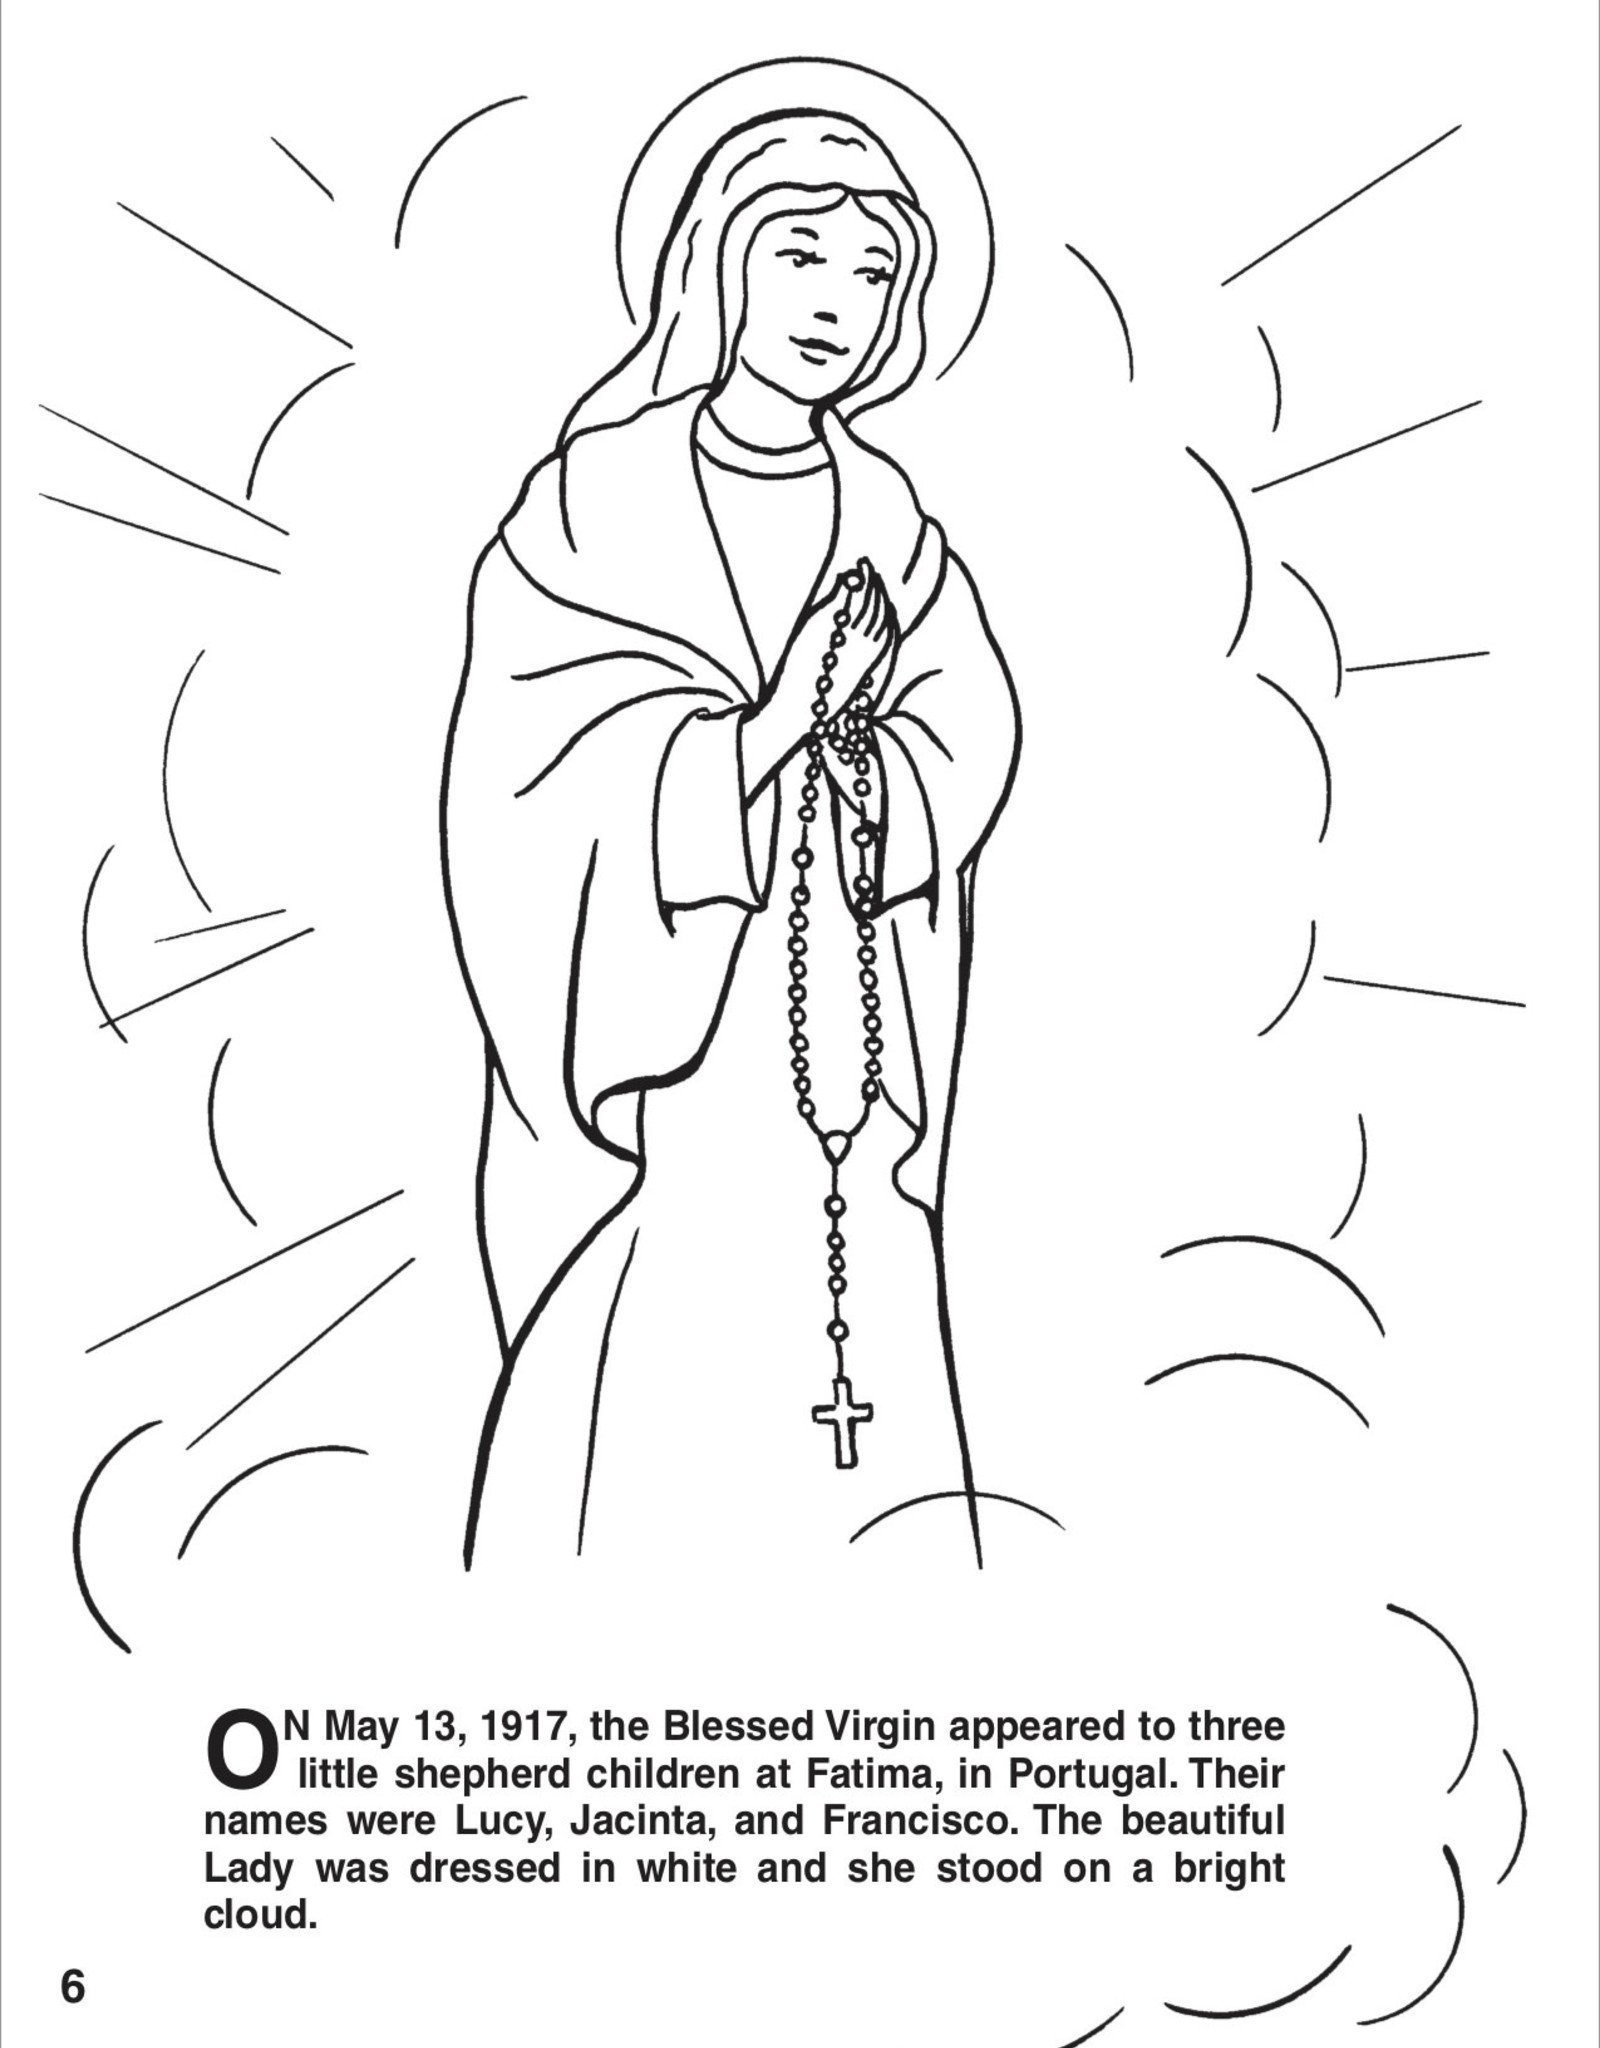 Coloring Book About the Rosary, by Lawrence Lovasik and pictures by ...